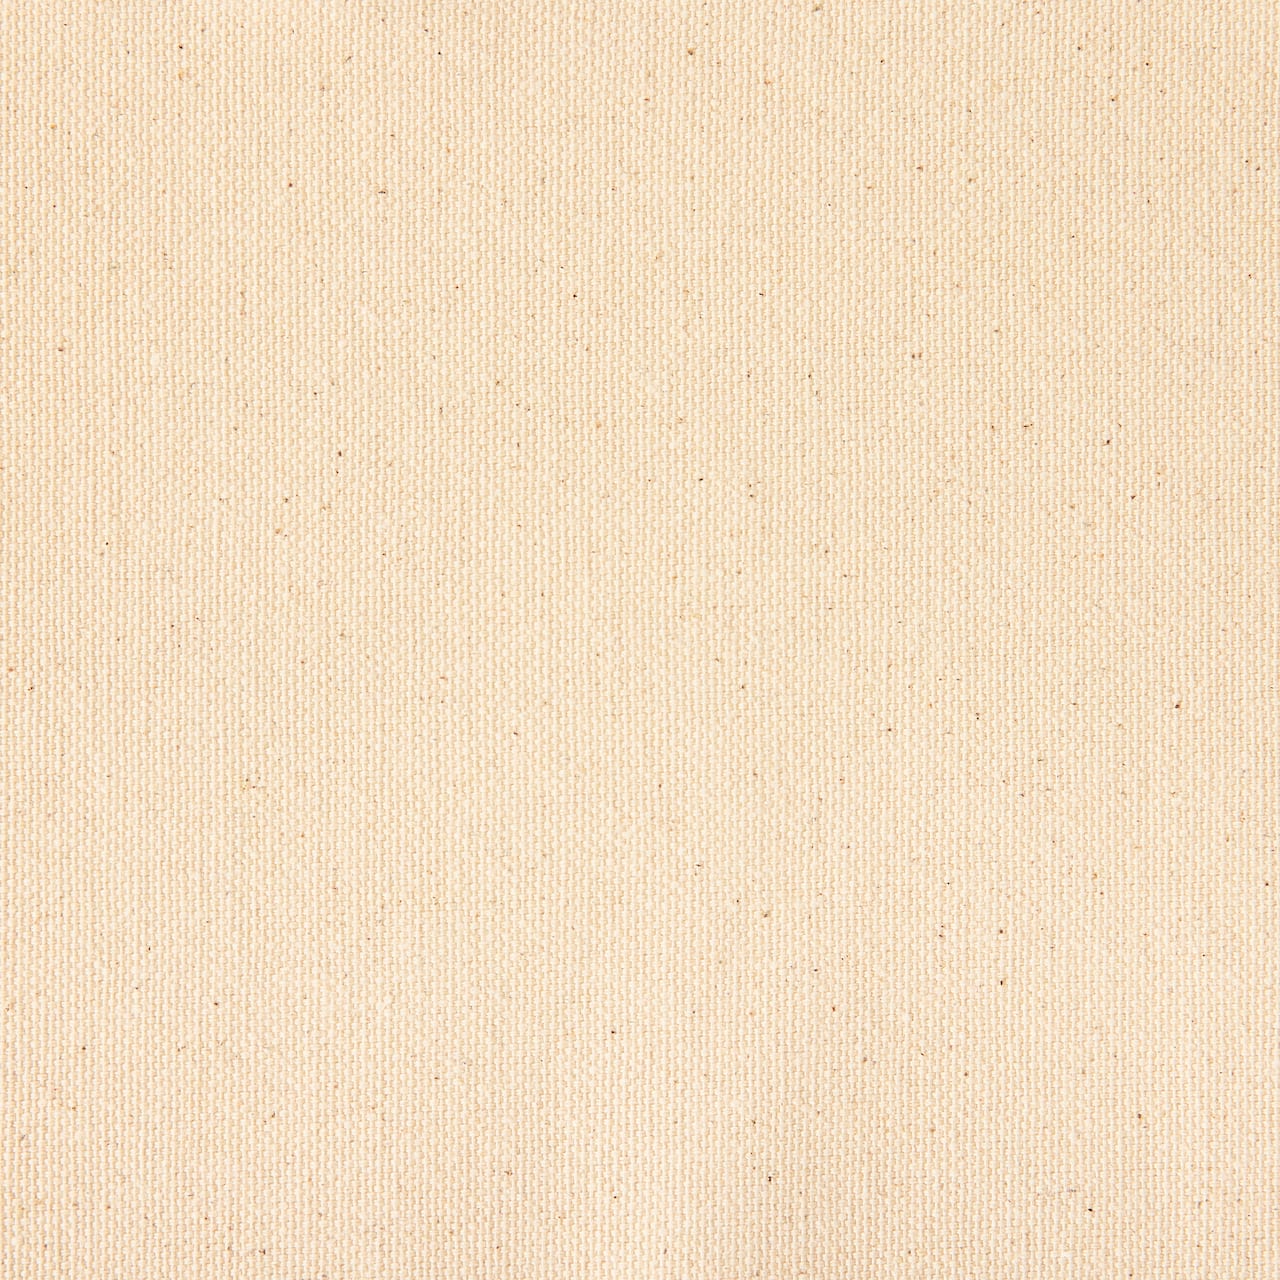 10 yd. Full Bolt: Natural Cotton Duck Canvas